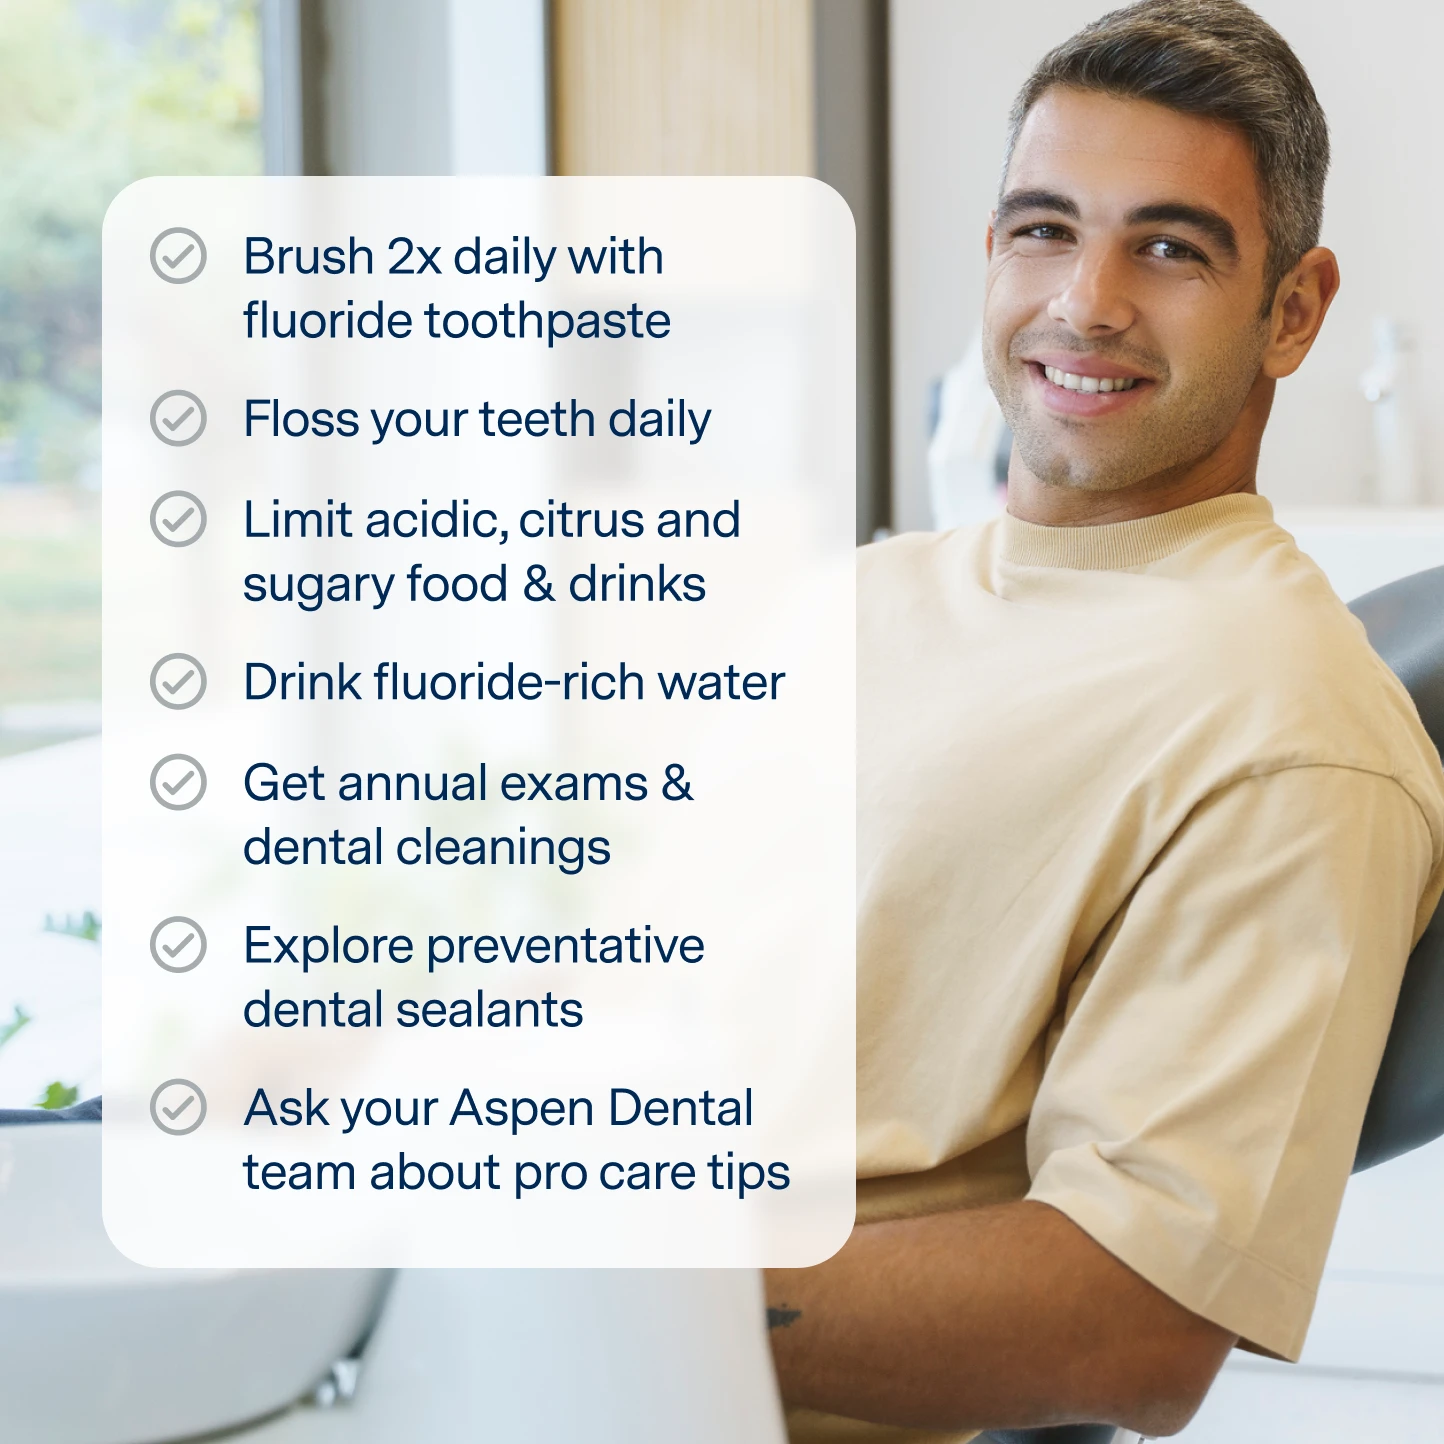 Brush 2x daily with fluoride toothpaste, floss your teeth daily, limit acidic, citrus and sugary food/drinks, drink fluoride water, get annual exams & dental cleanings, explore preventative dental sealants, and ask your Aspen Dental team about pro care tips. 